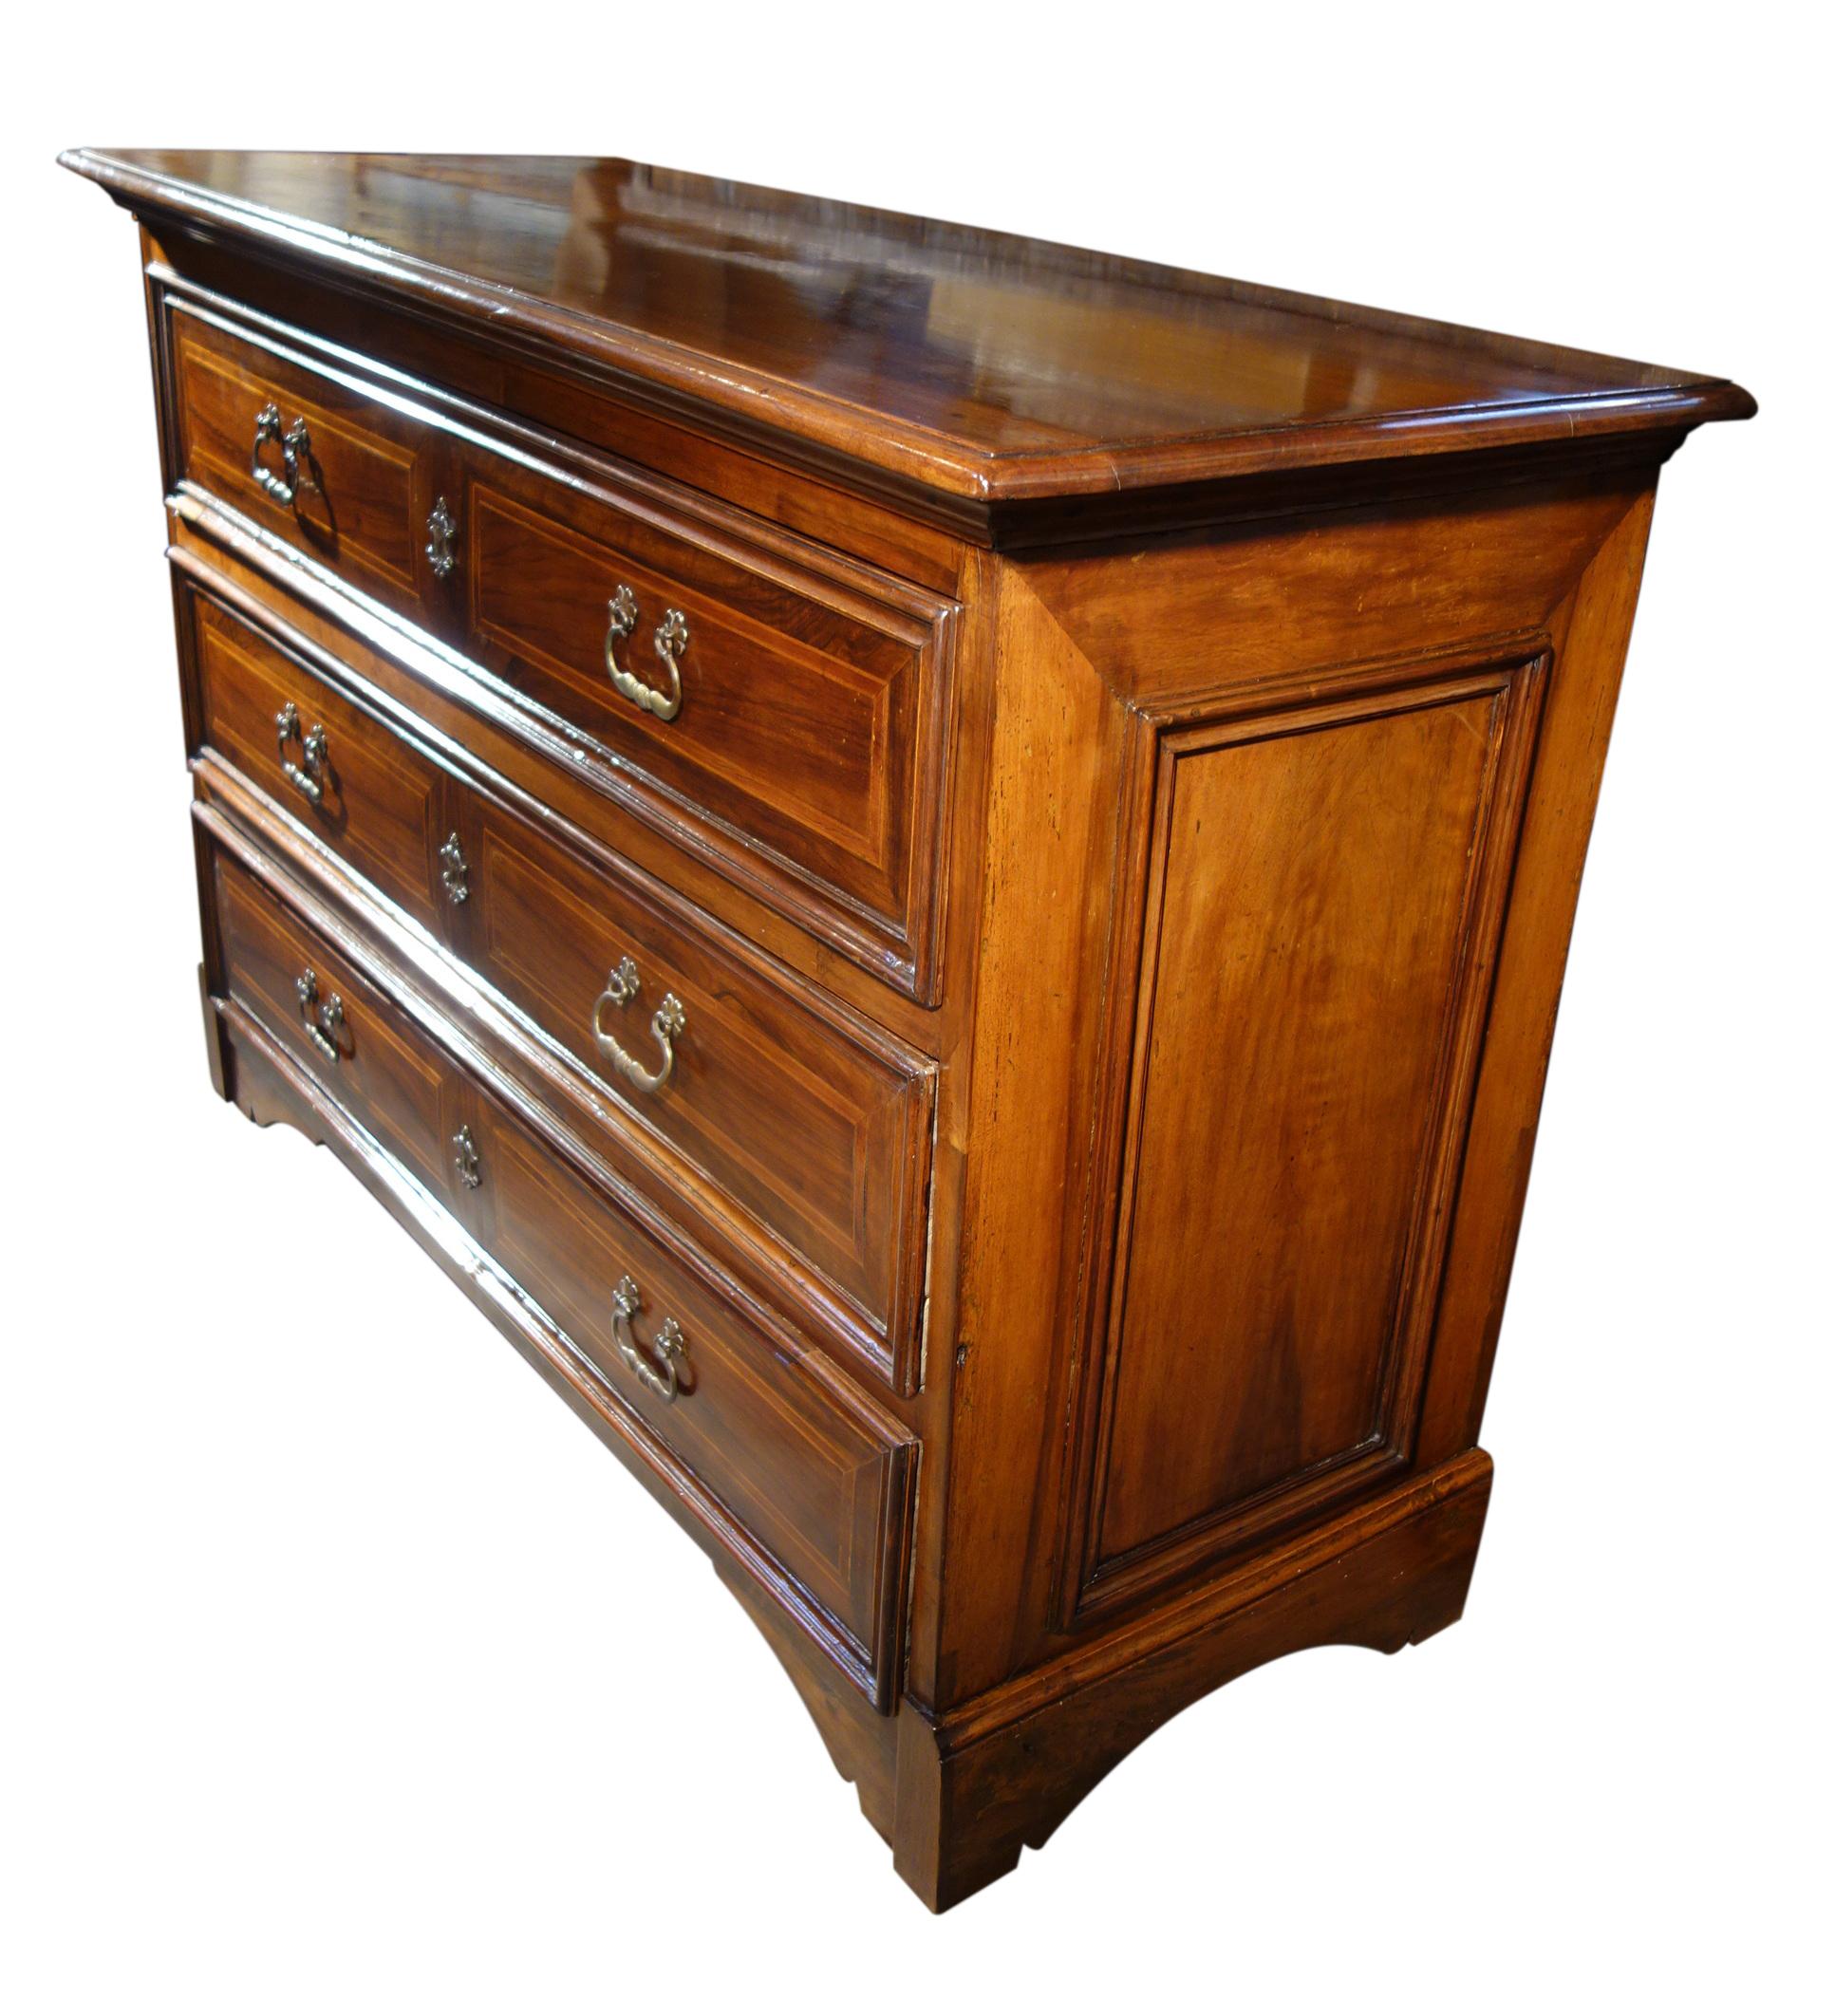 Early 18th Century Italian Louis XIV Walnut Dresser with Fruitwood Inlay & Brass For Sale 5